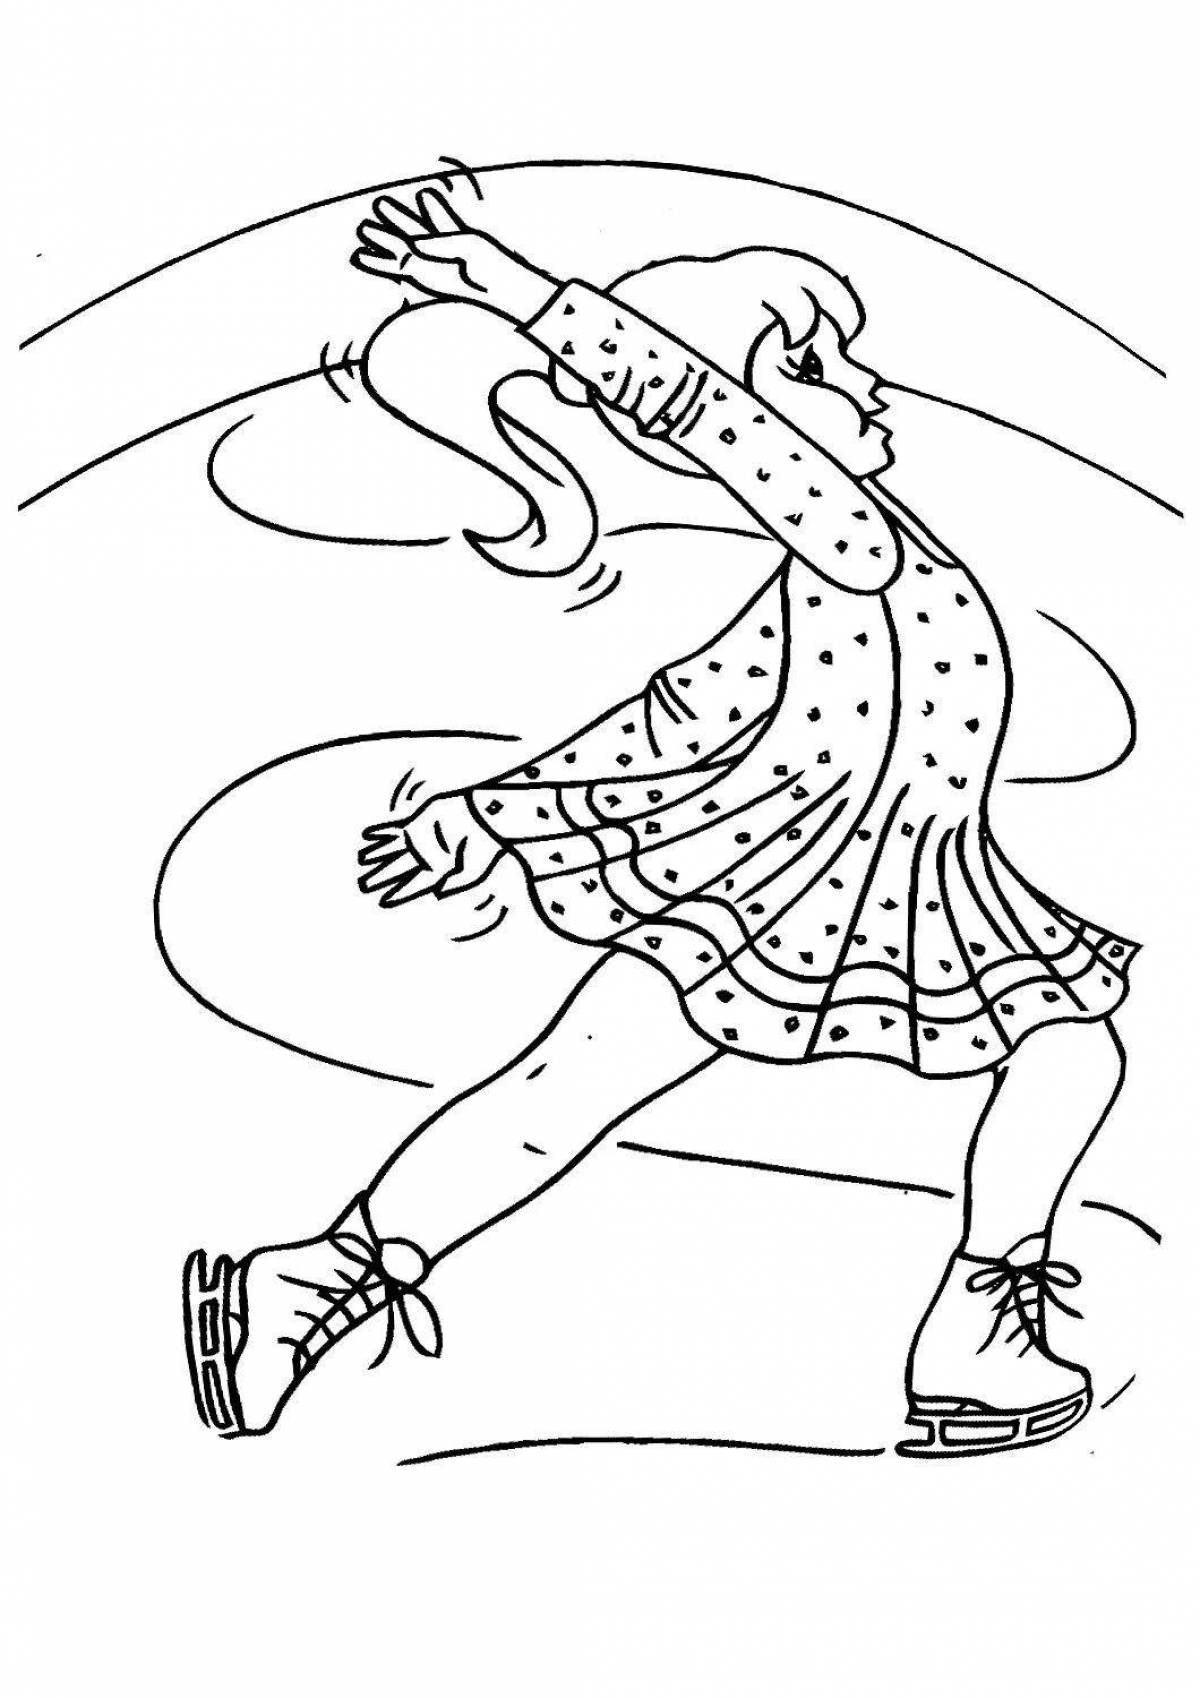 Exquisite figure skater coloring book for kids